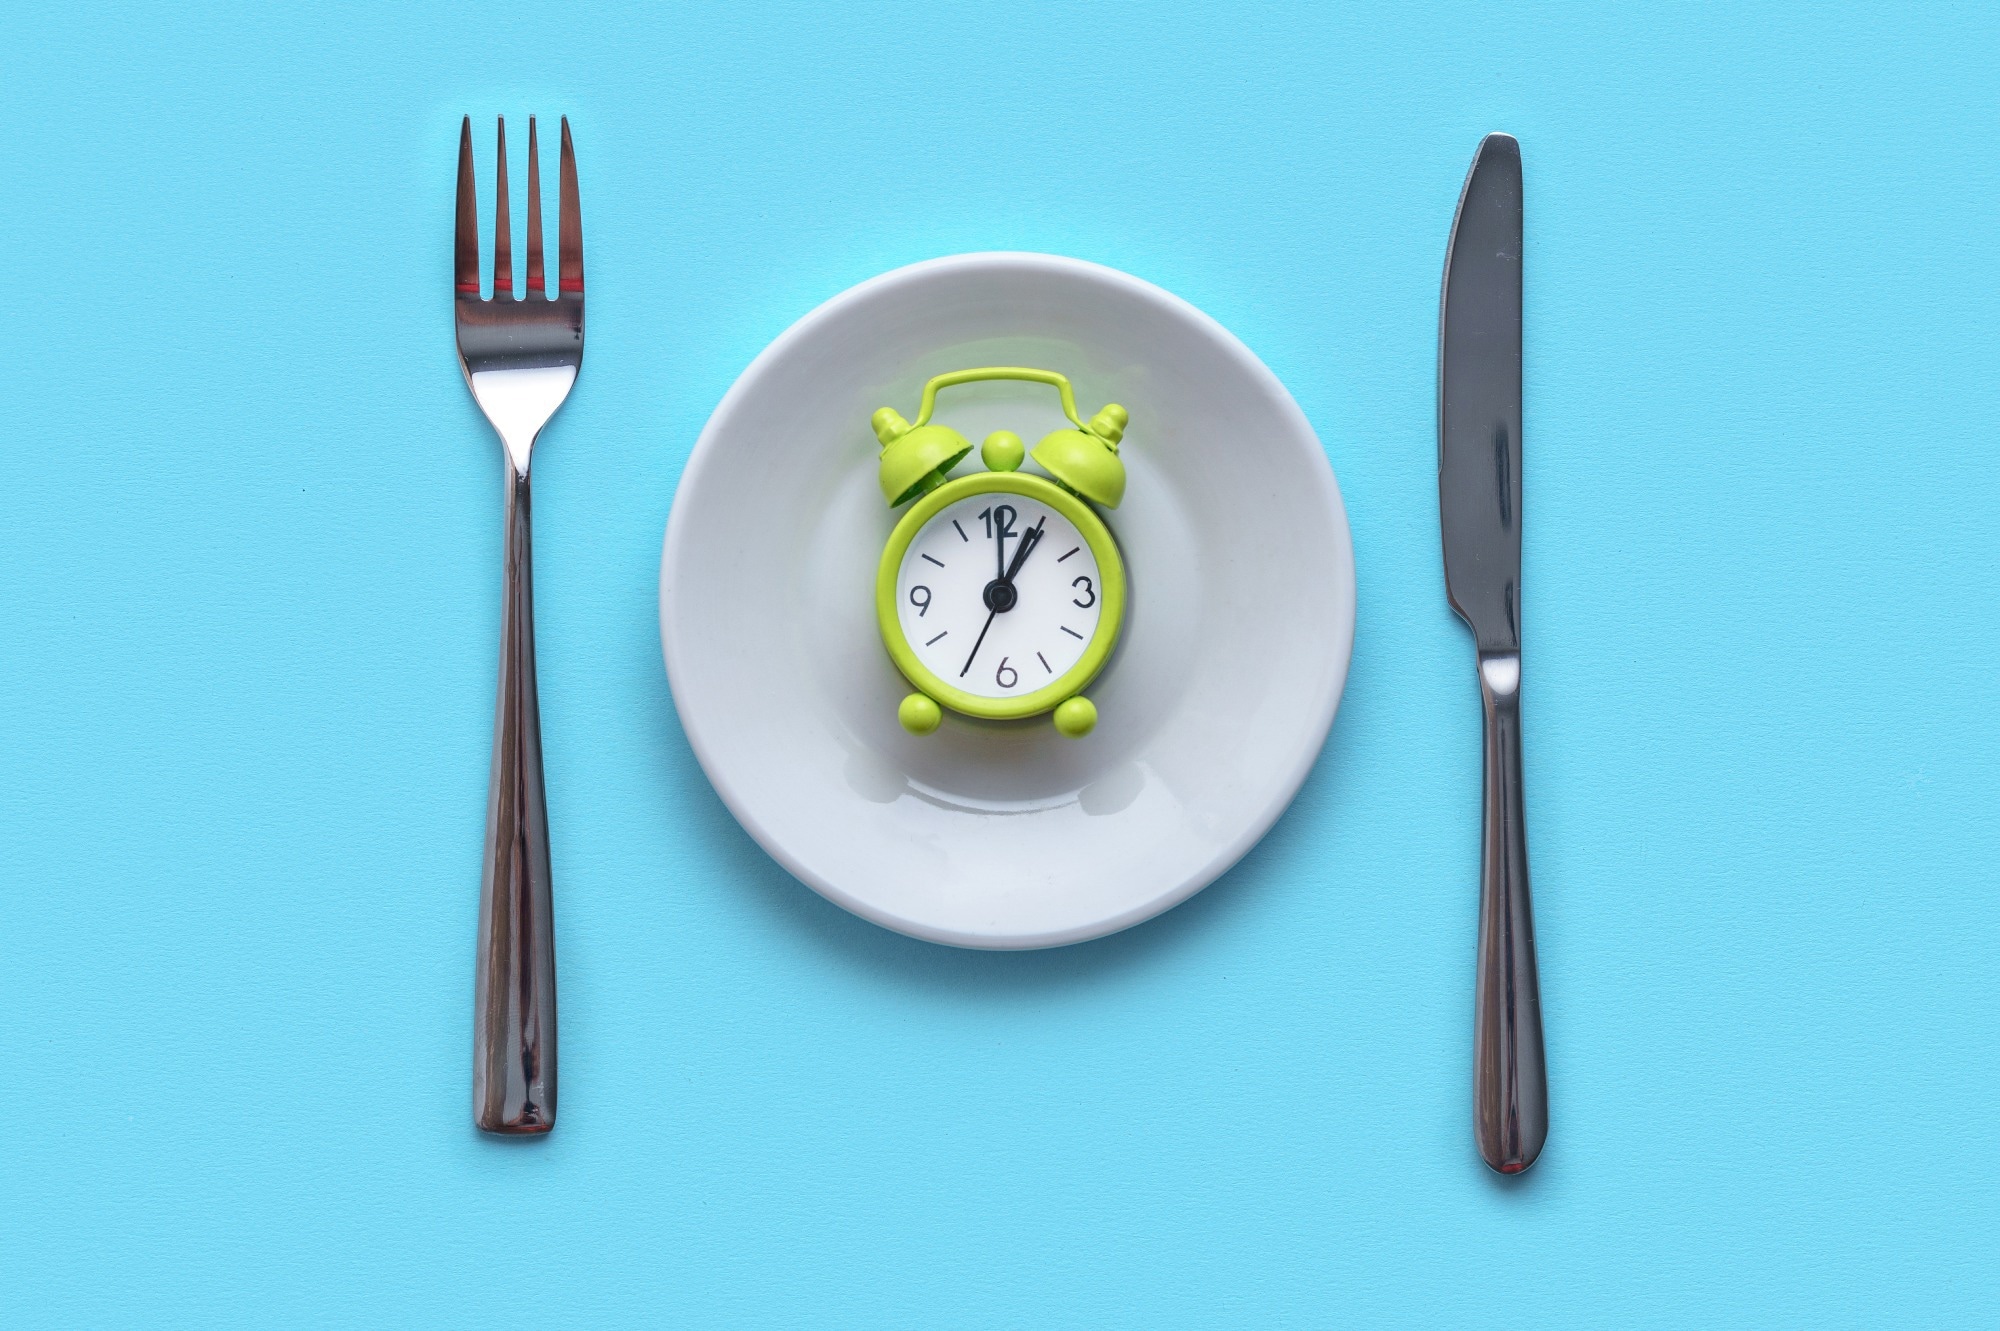 Effects of time-restricted eating and calorie restriction on sex hormones